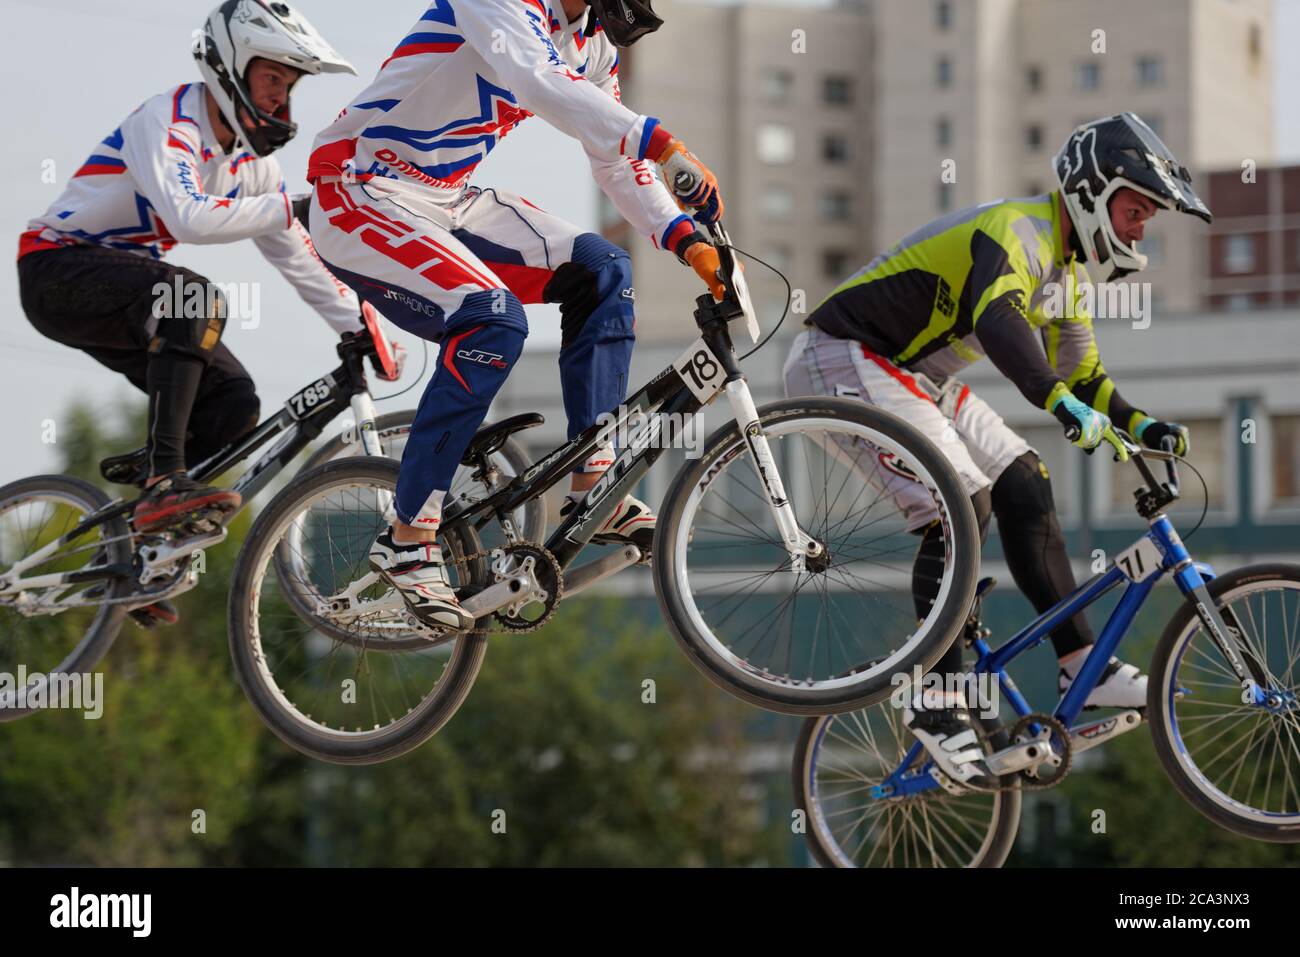 St. Petersburg, Russia - August 6, 2015: Unidentified bikers in the BMX  race Cruiser. The competitions is a stage of the BMX racing championship of  Russia Stock Photo - Alamy